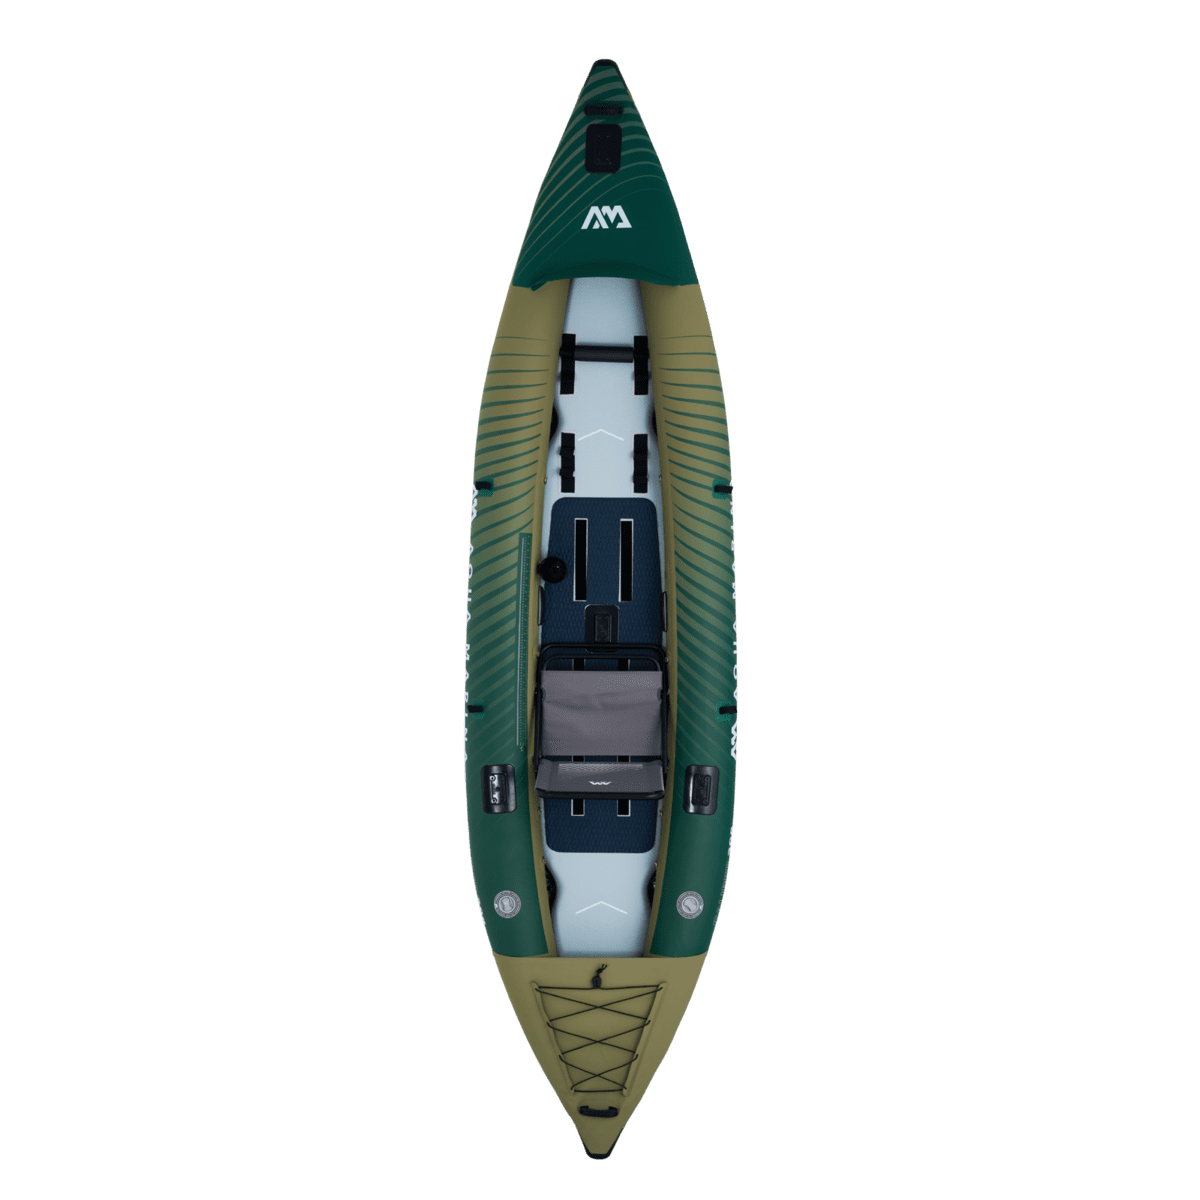 Aqua Marina Caliber Angling 1 Person Inflatable Kayak With Foldable Fishing Seat (paddle excluded)